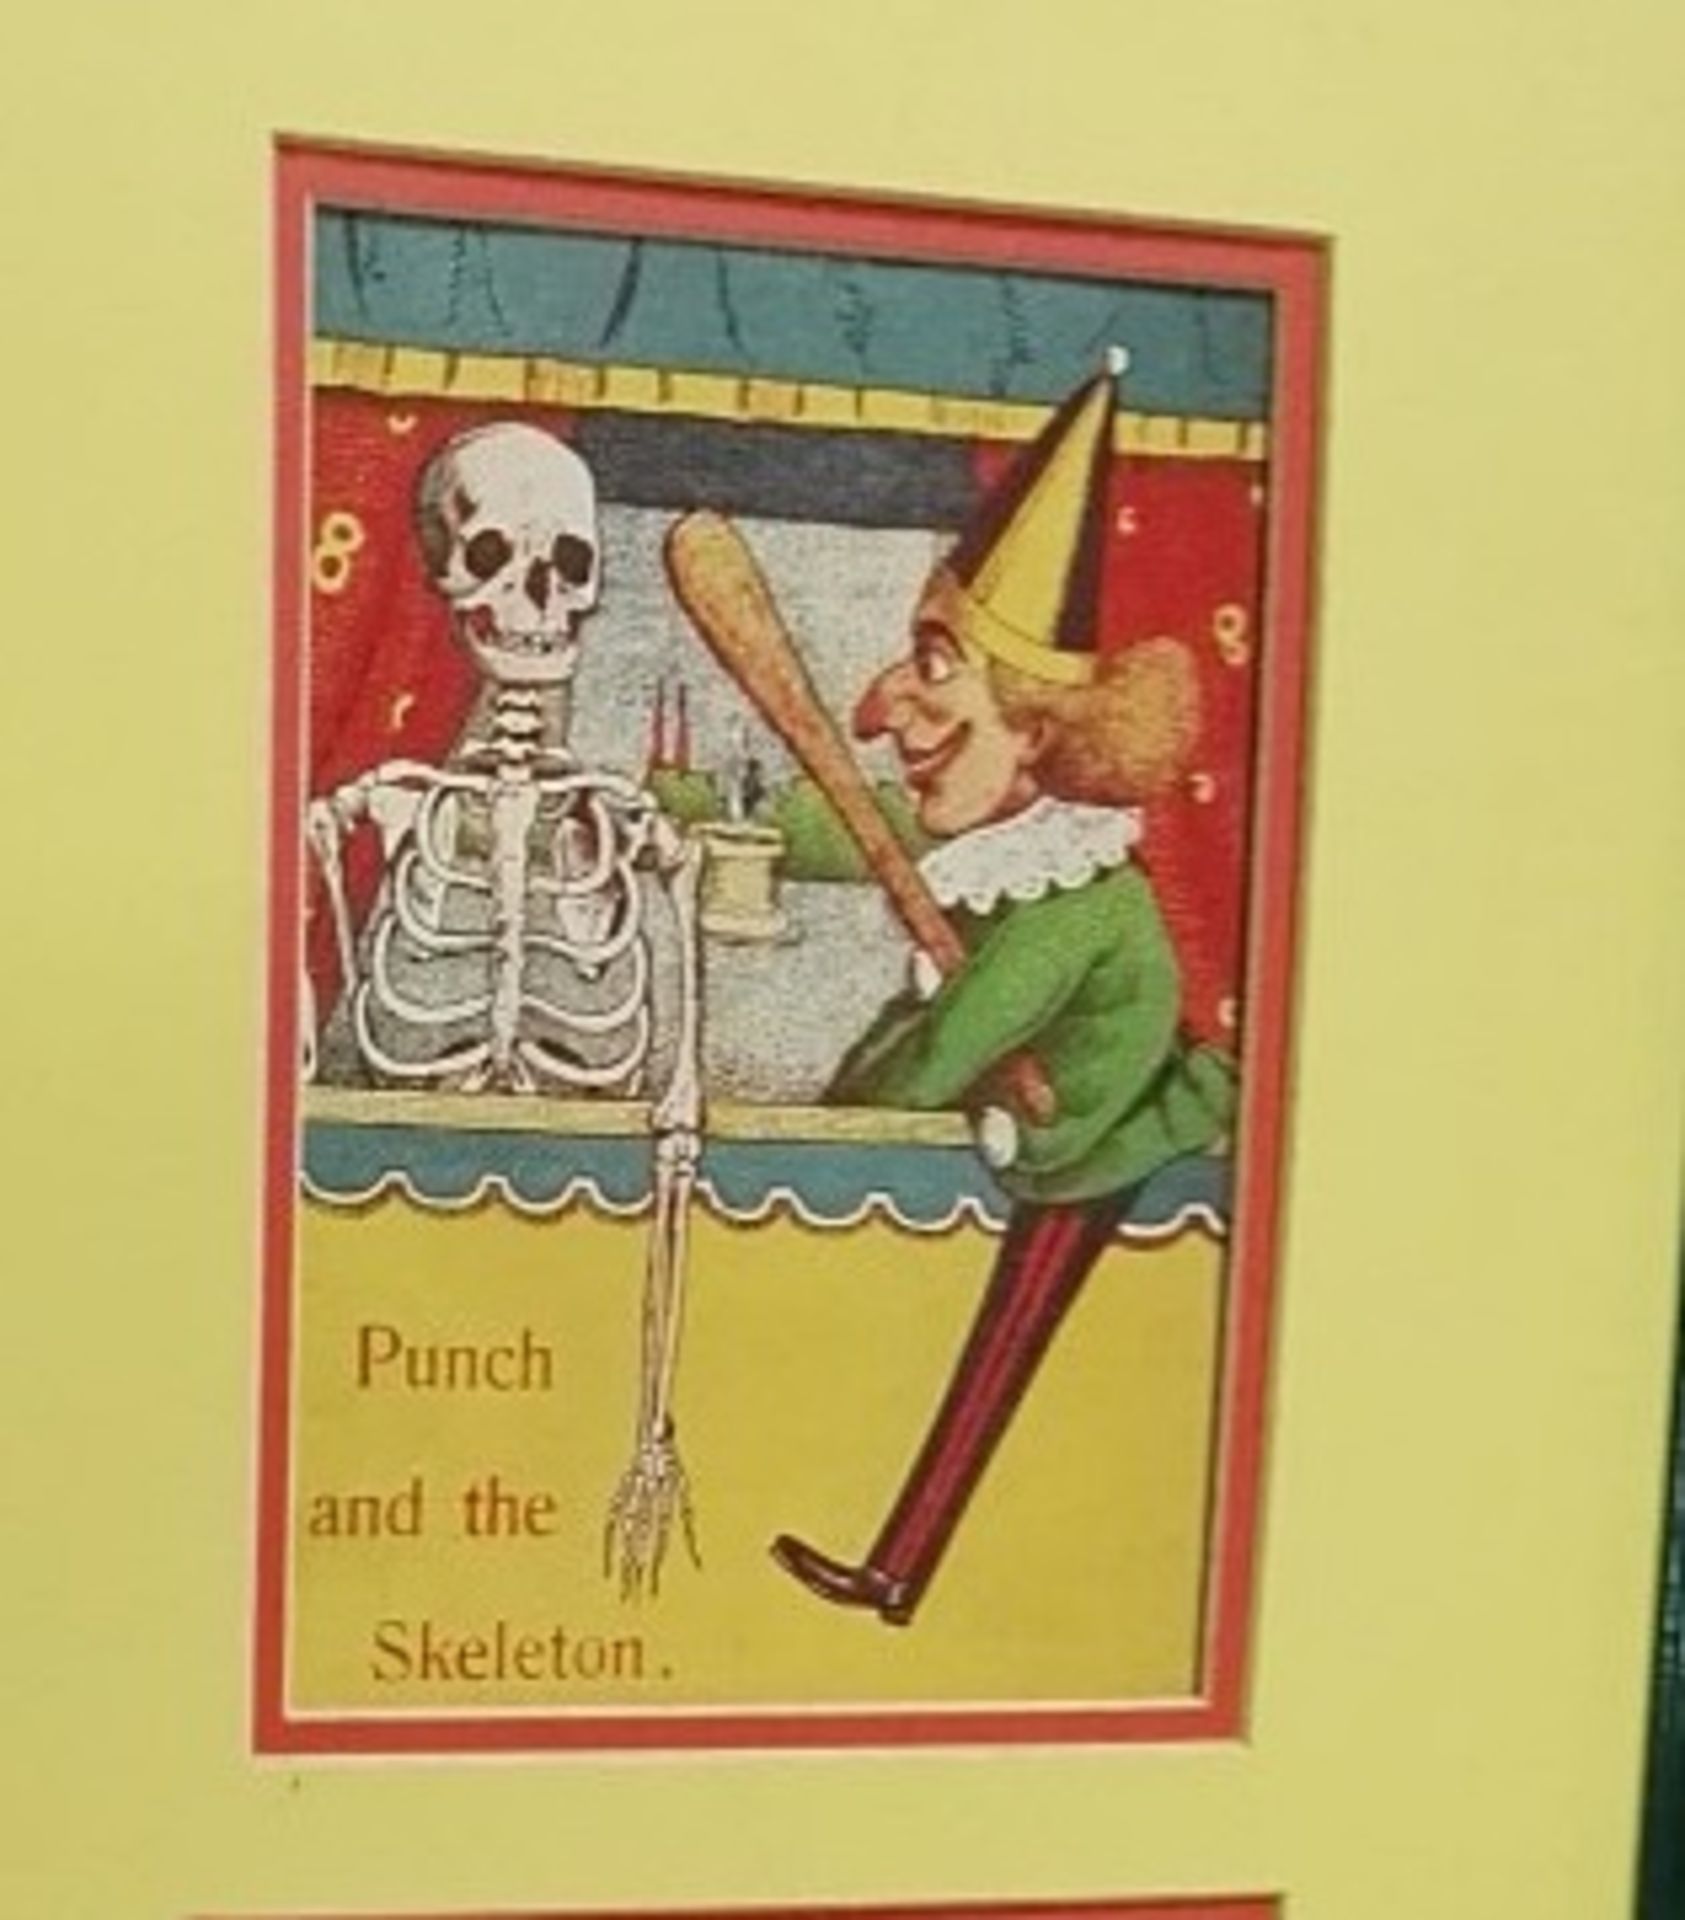 1 x 'Punch And The Skeleton' Framed Picture - Dimensions: H54 x W29cm - Ref M553 / BC - Image 2 of 3